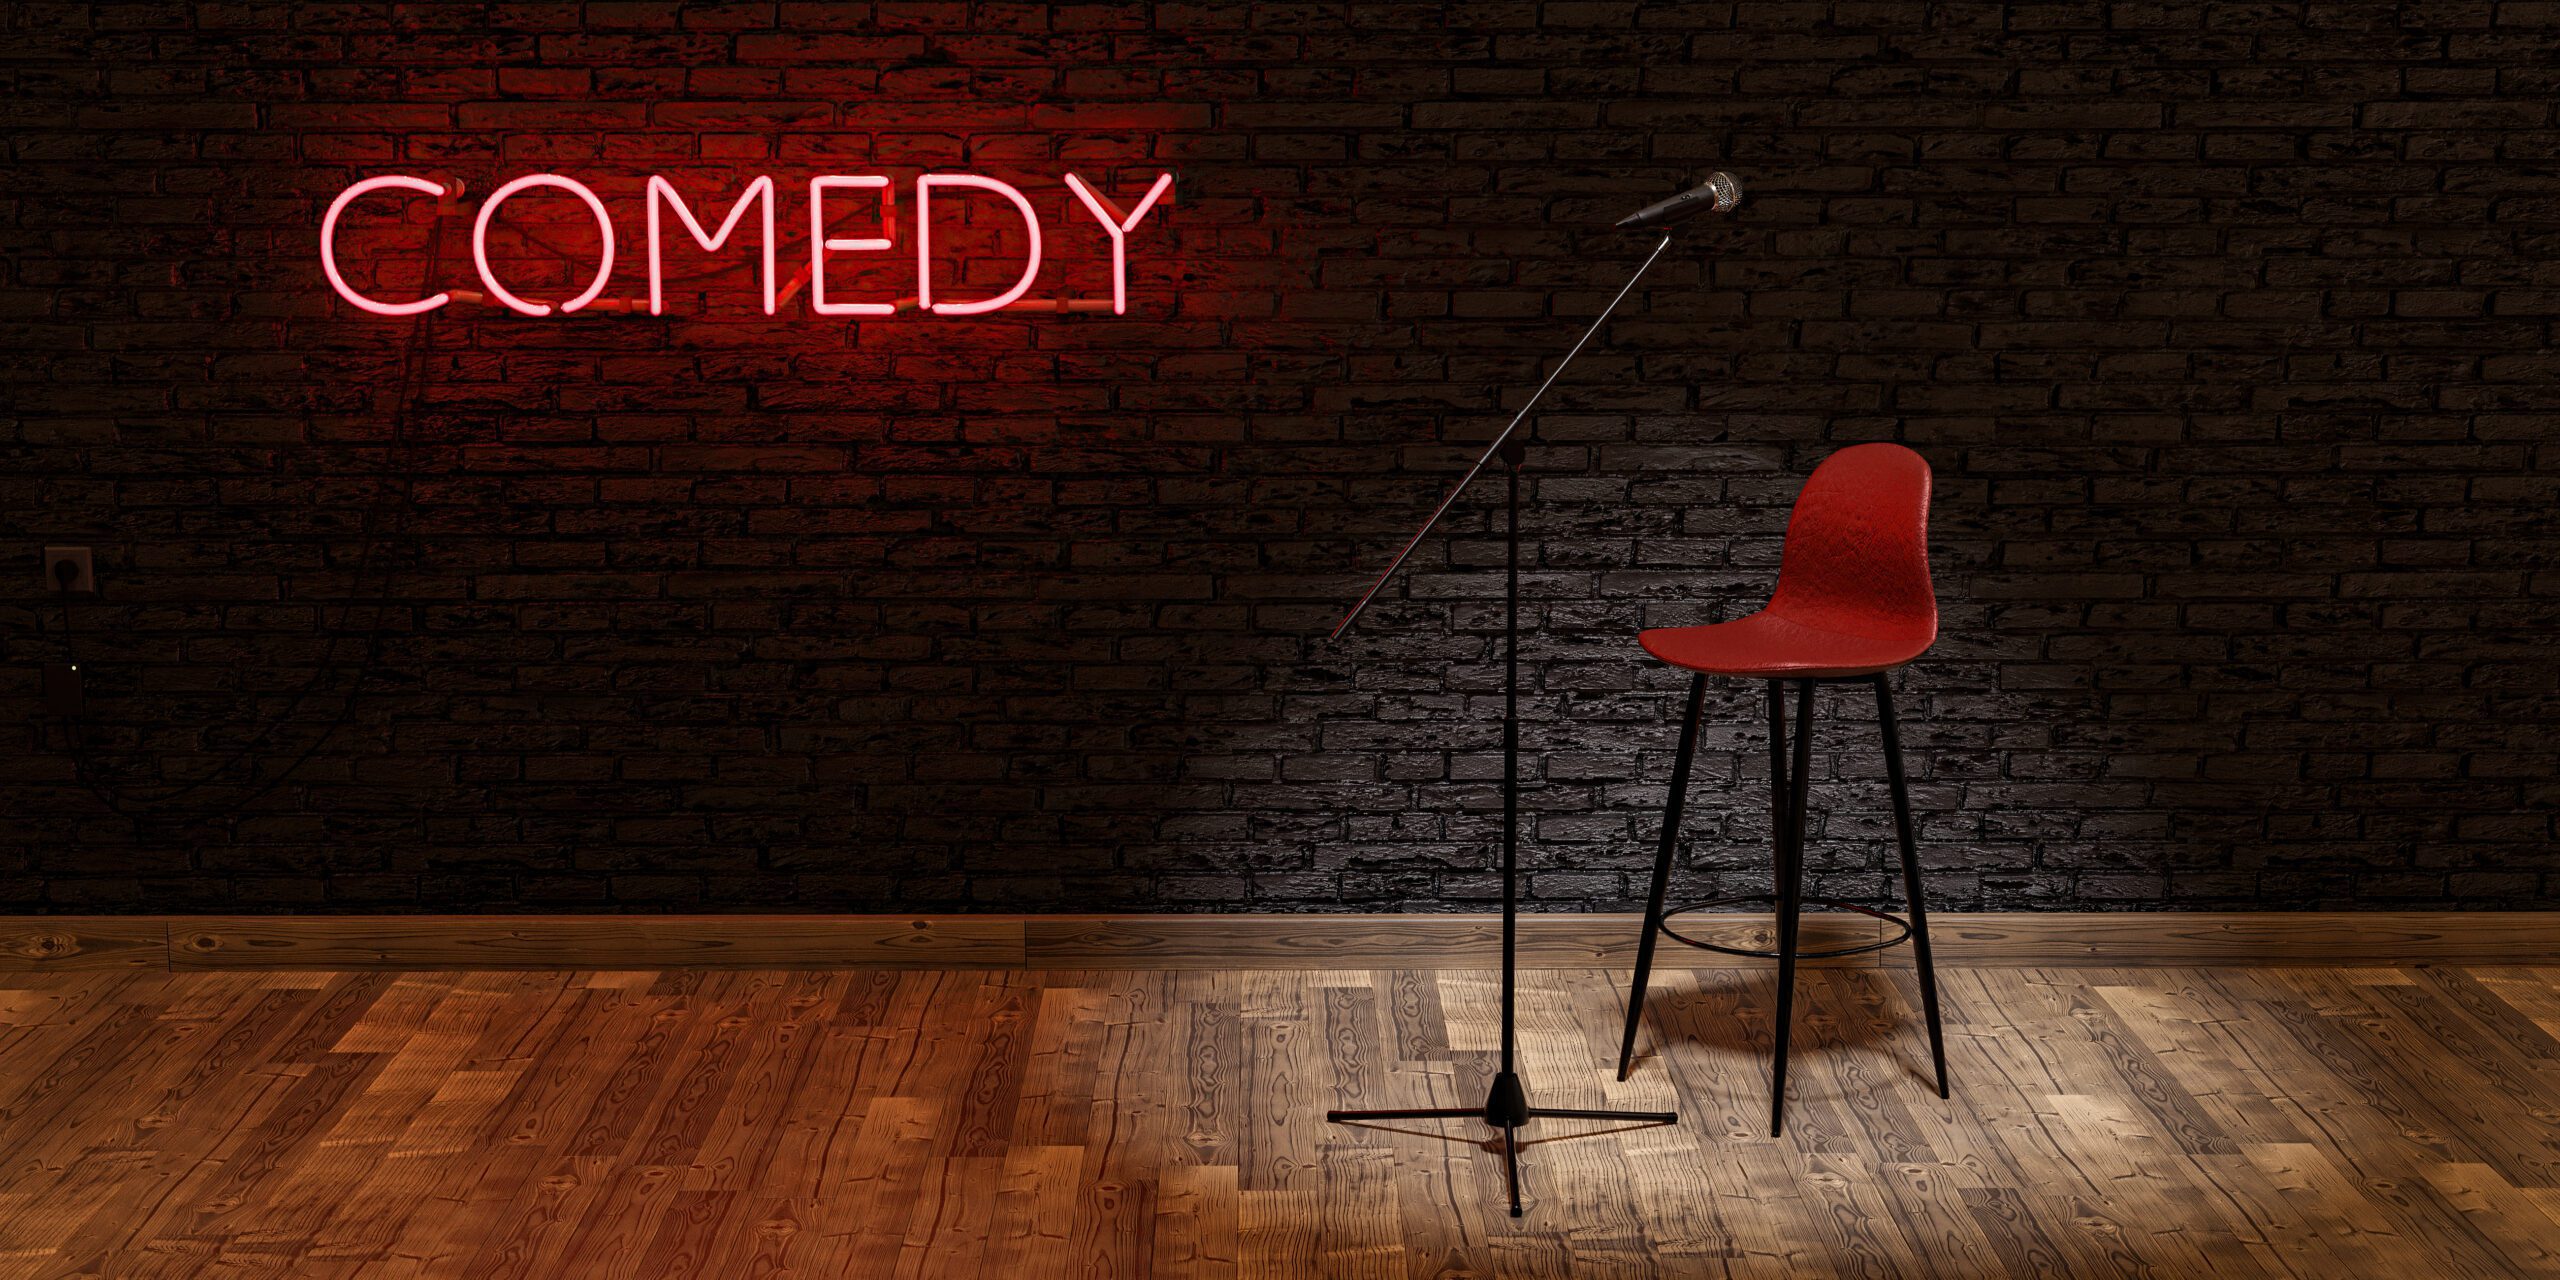 Stage with microphone and stool illuminated by a spotlight with the word COMEDY on a red neon lamp and brick wall.